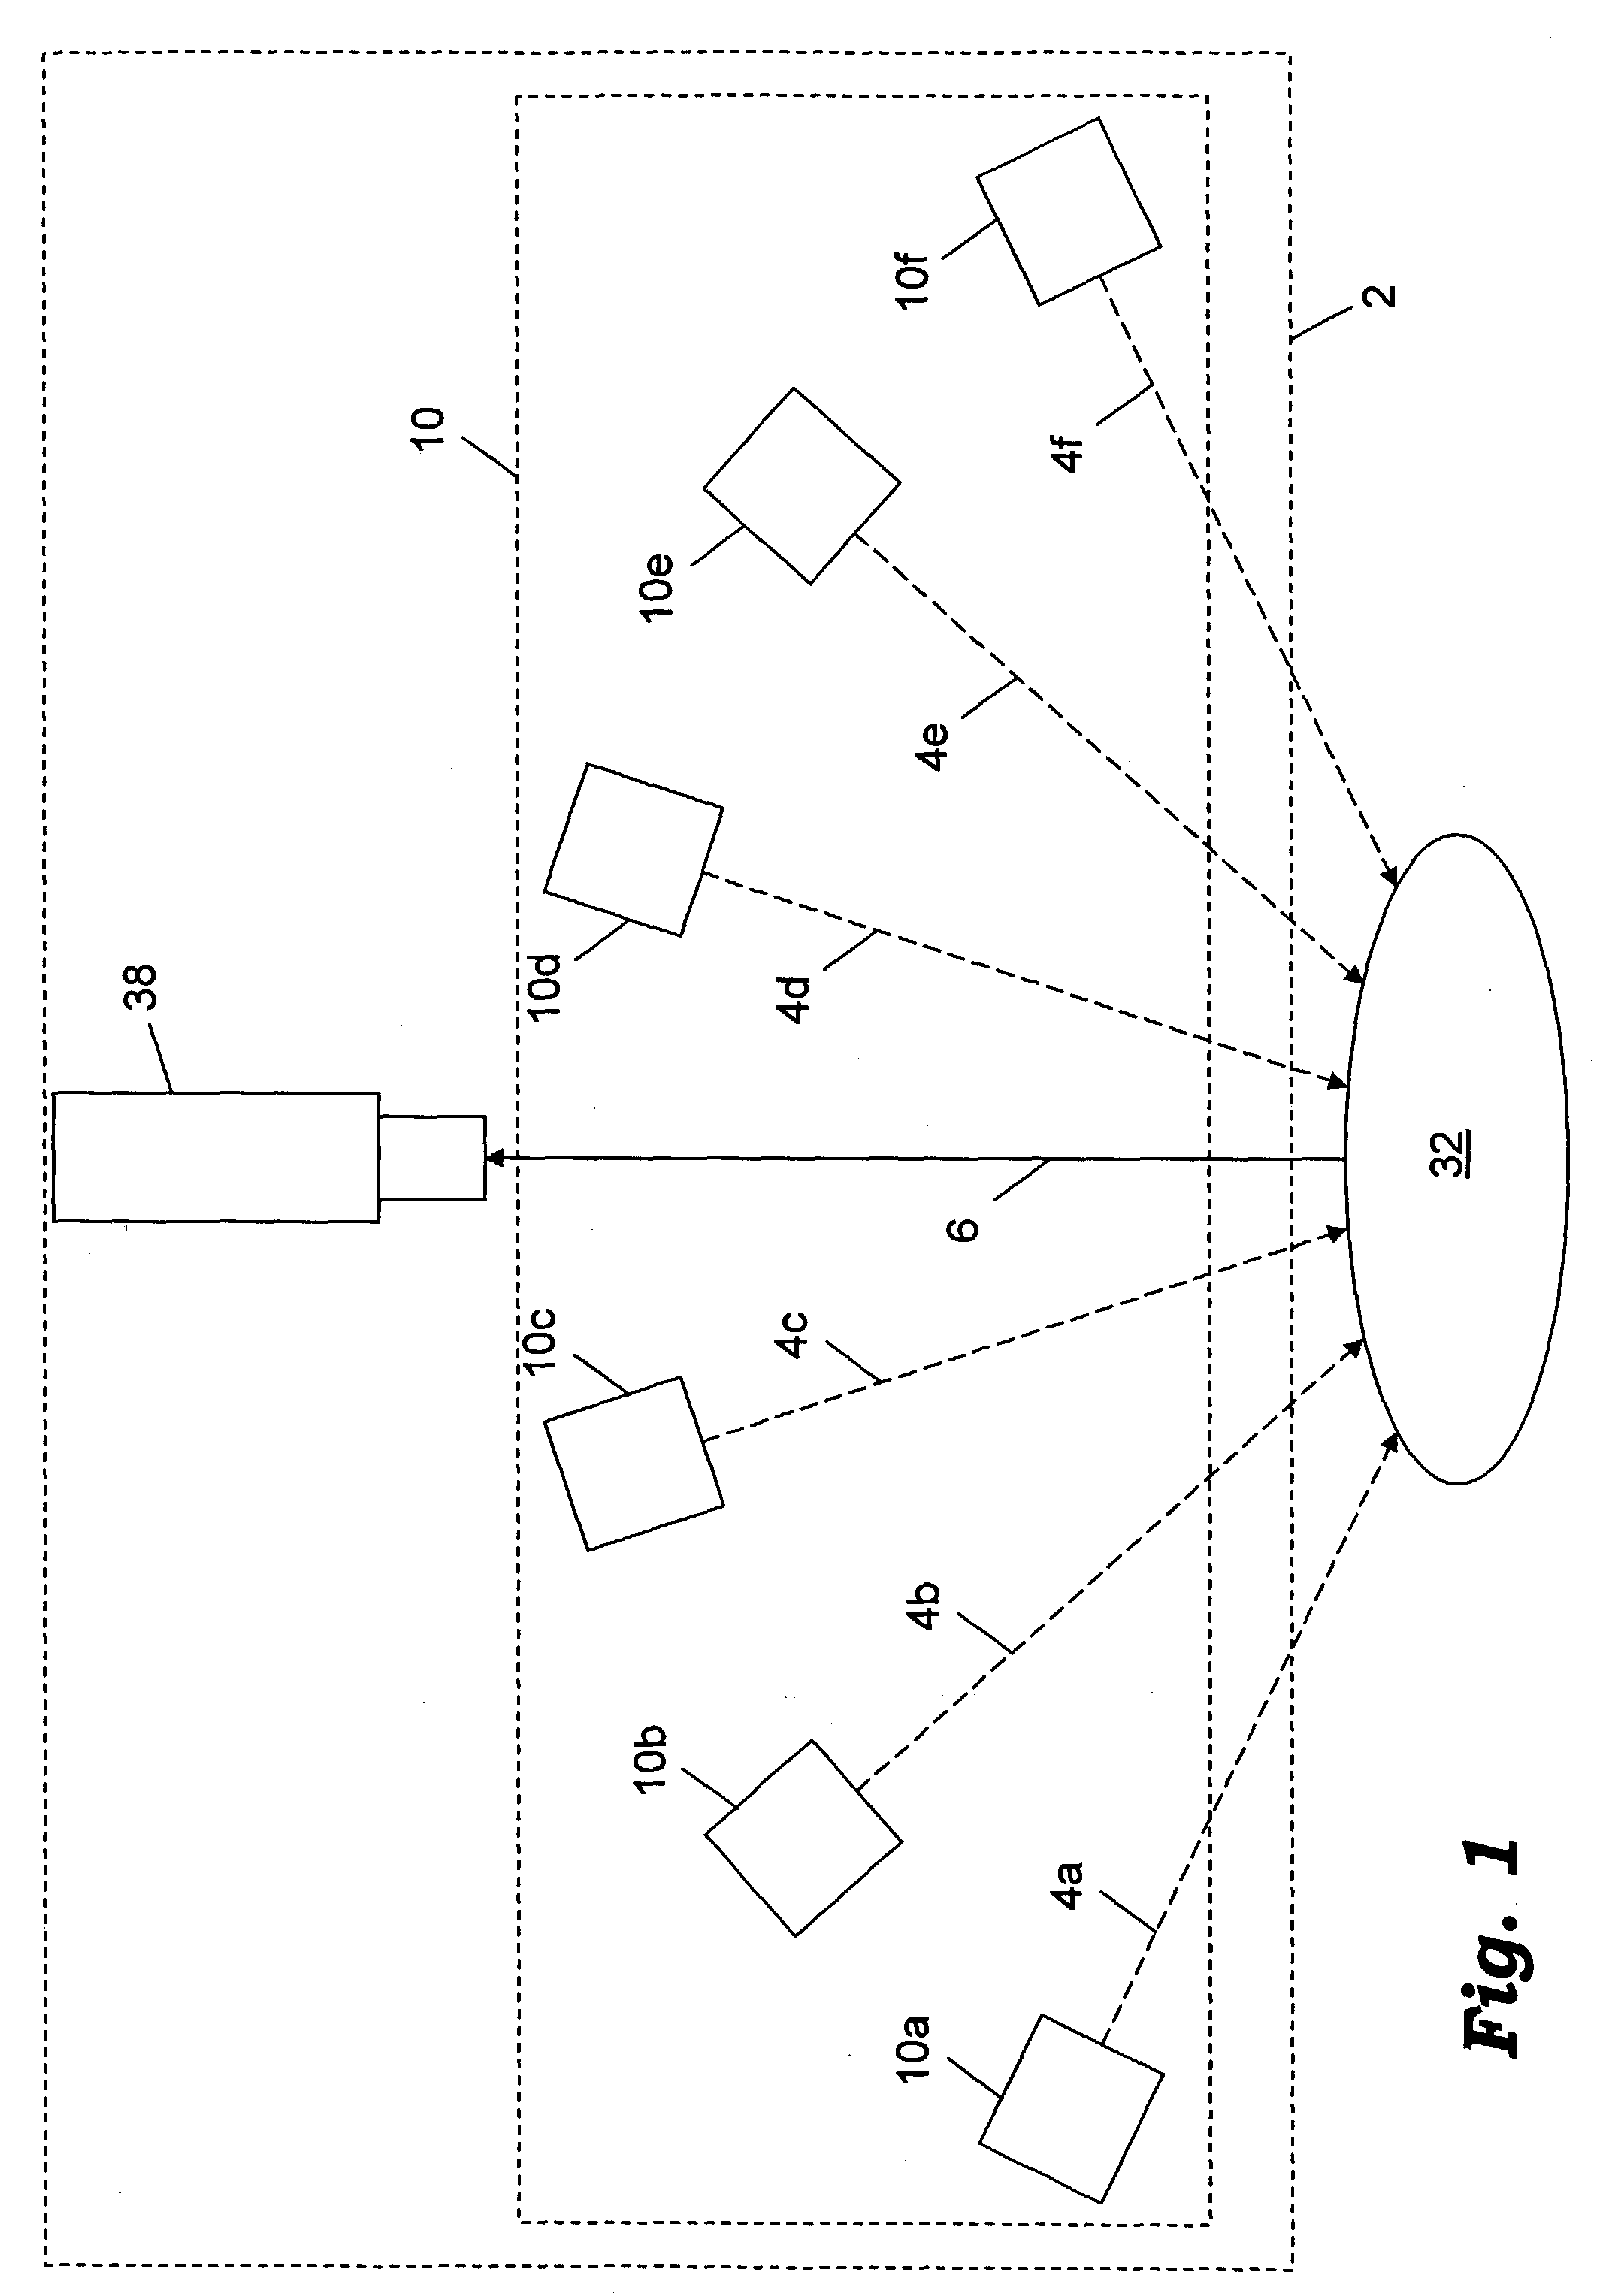 Imaging system using diffuse infrared light